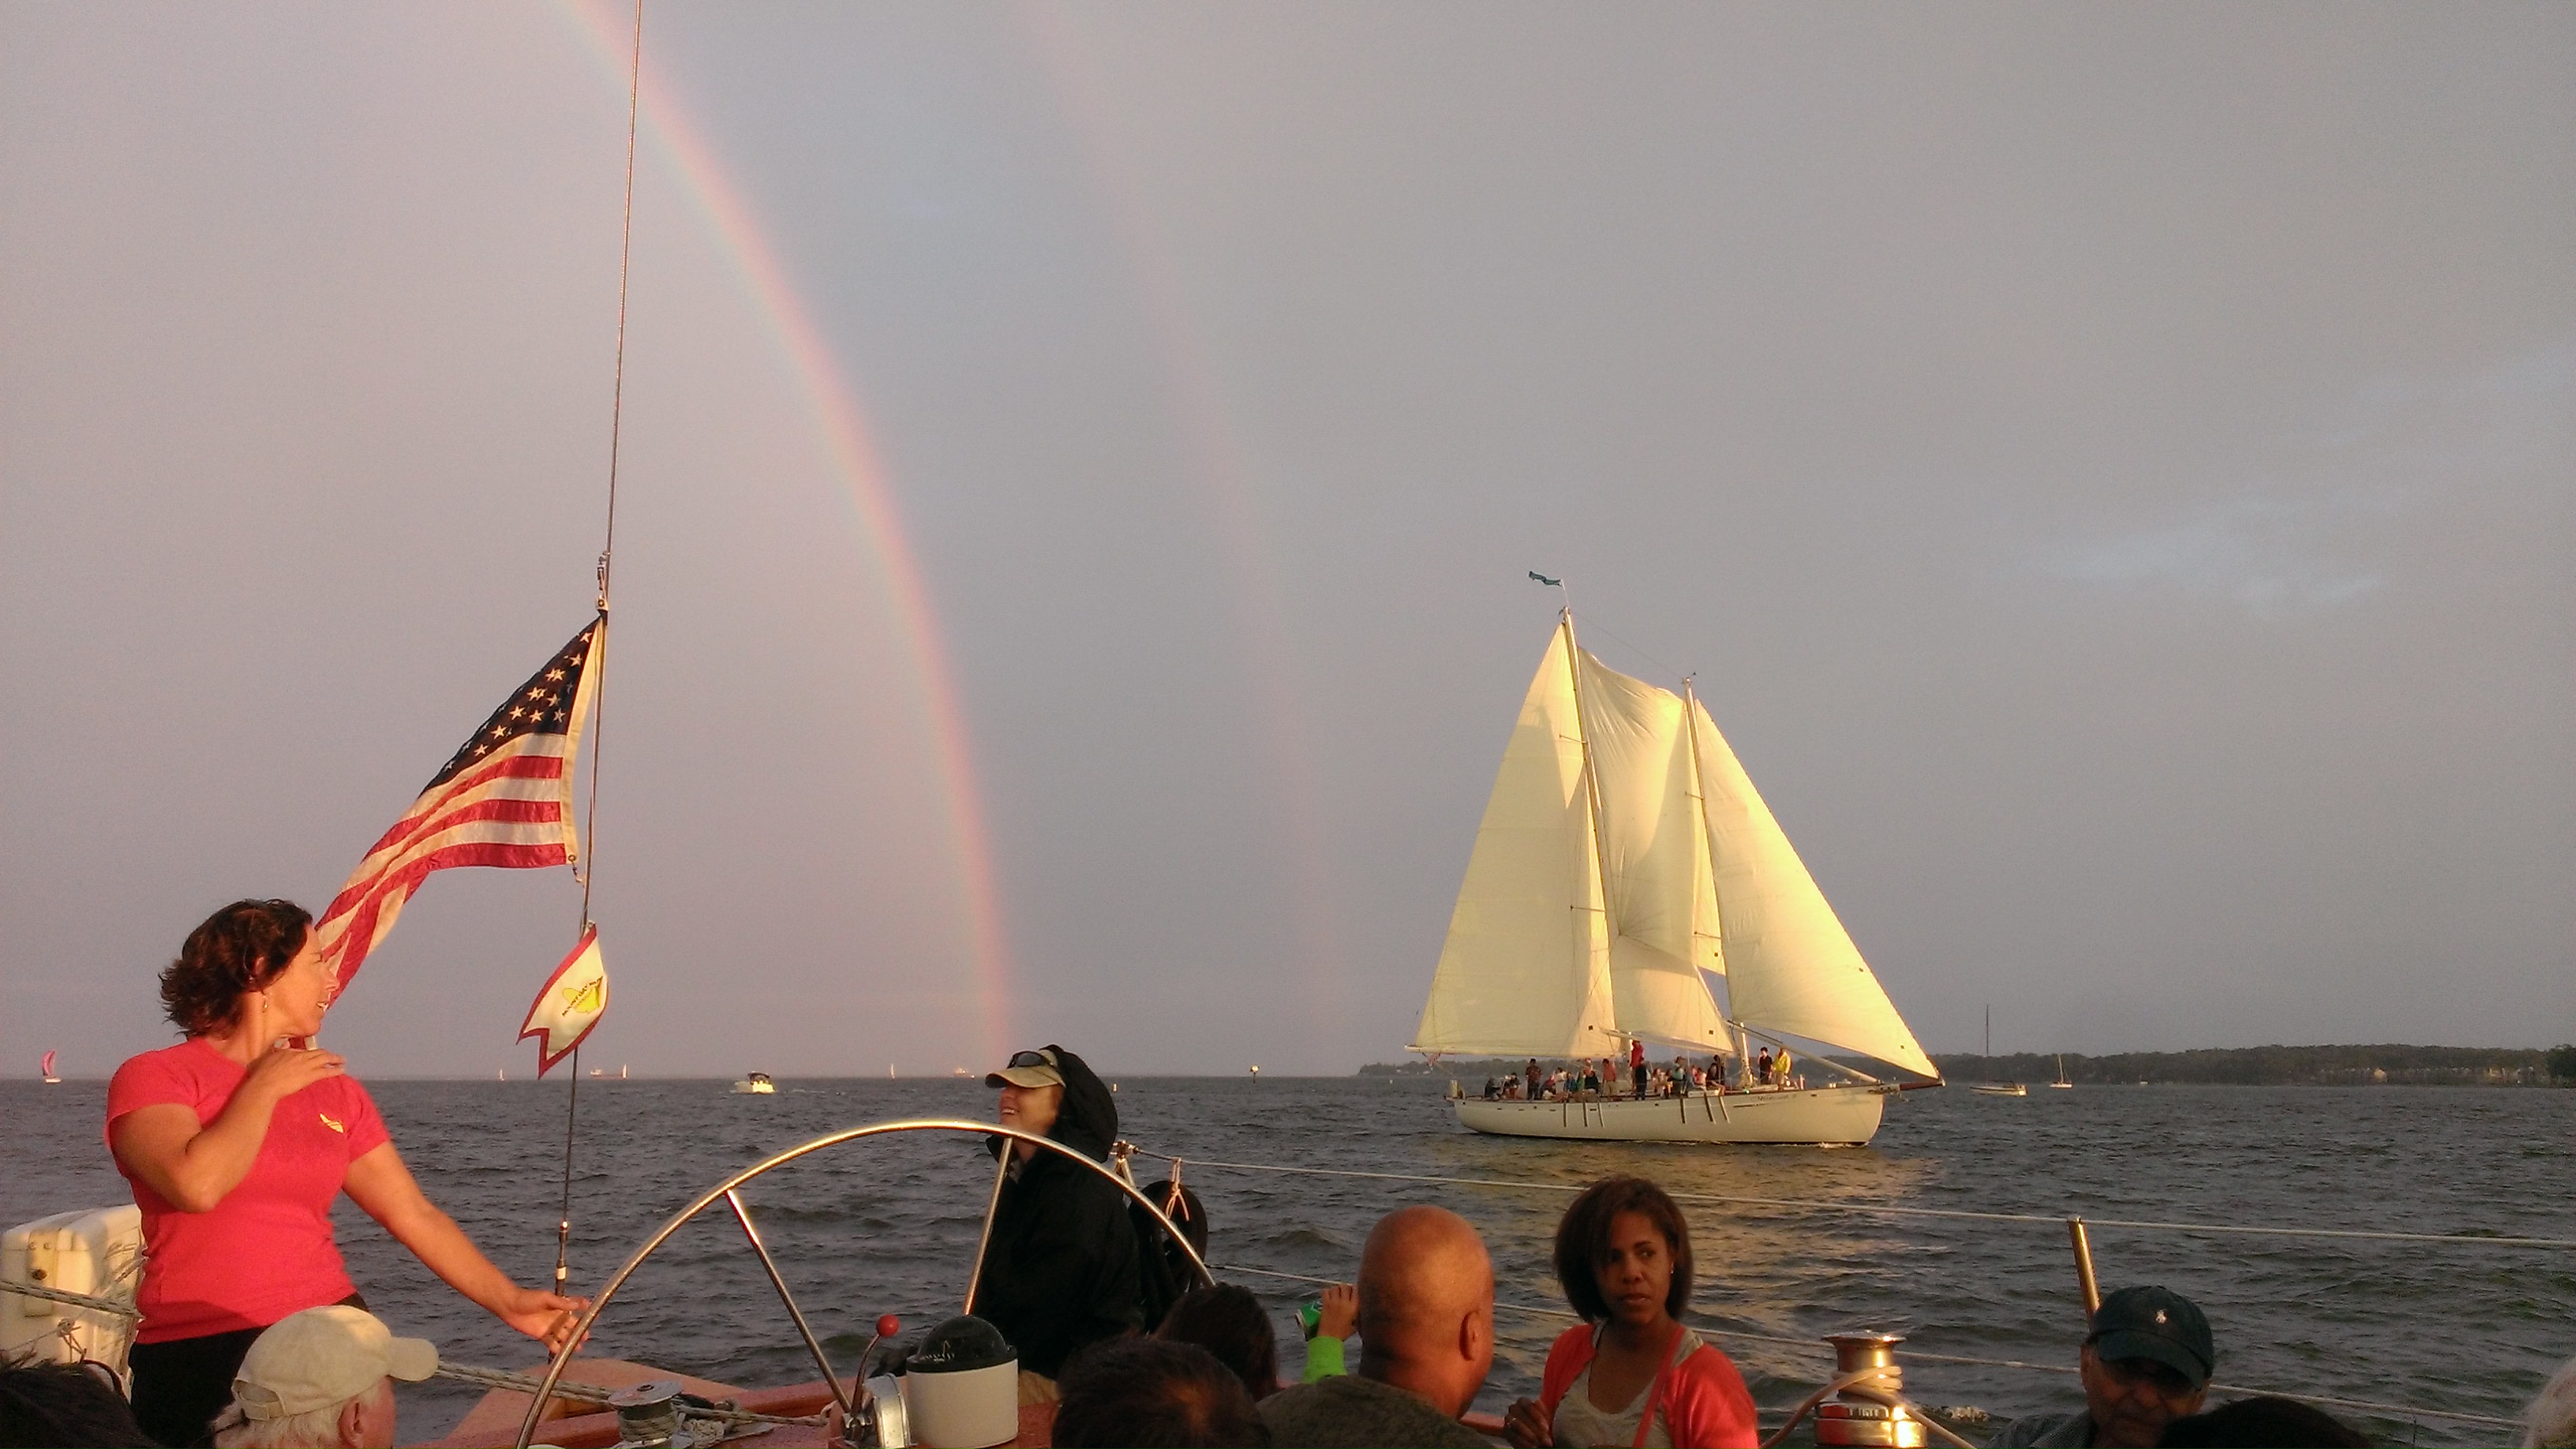 Rainbow over both schooners sailing together